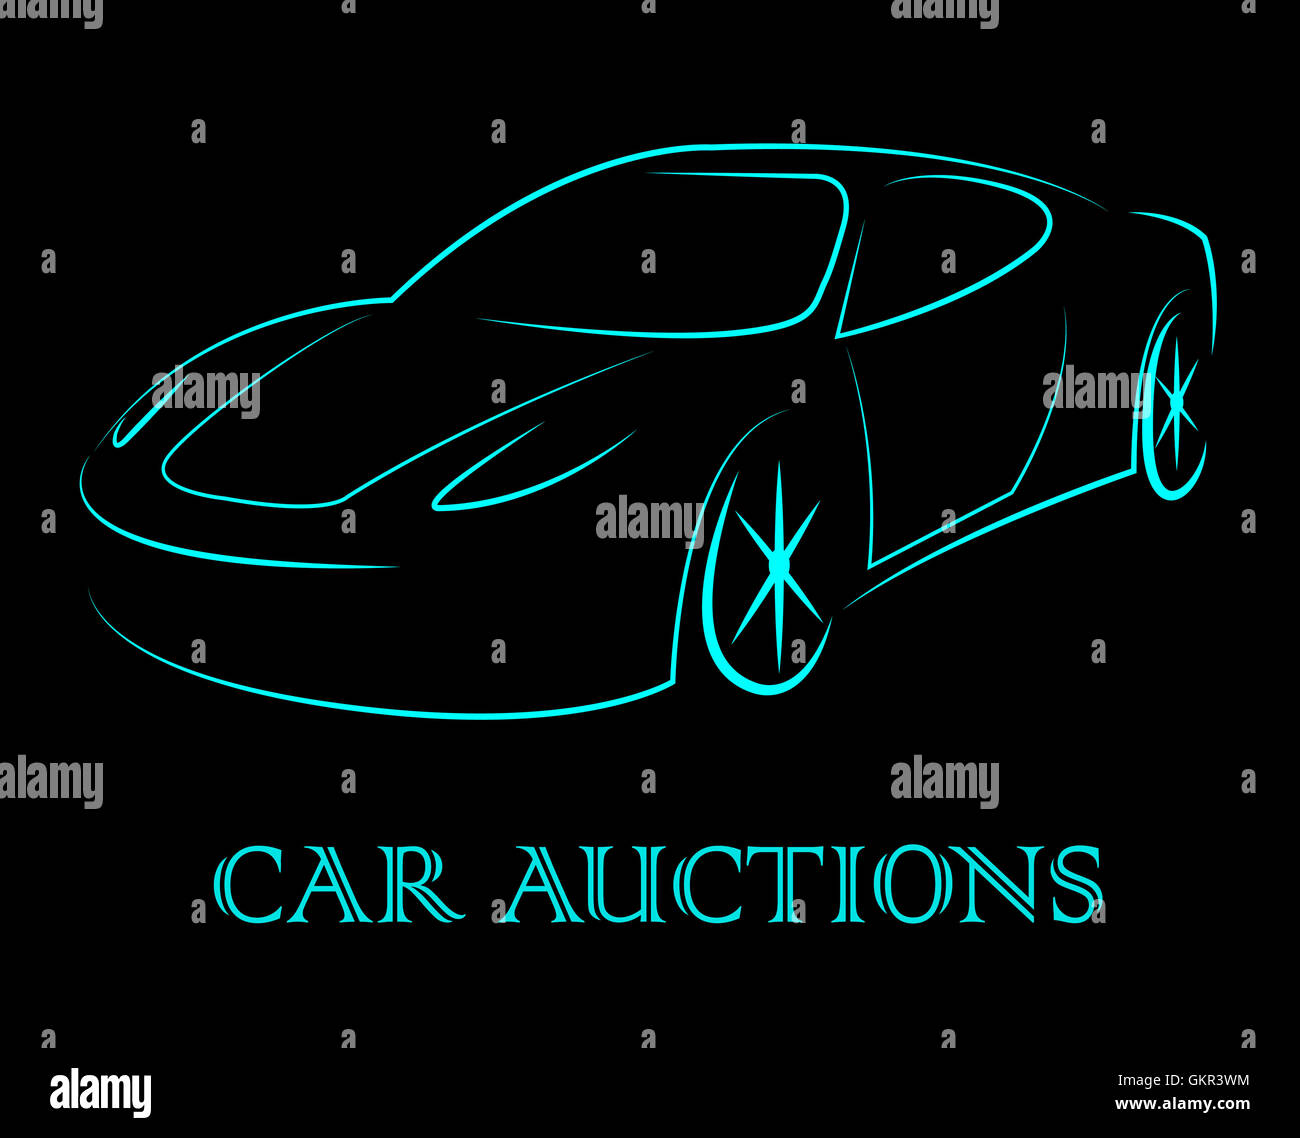 Car Auctions Meaning Bidding On Motor Vehicles Stock Photo